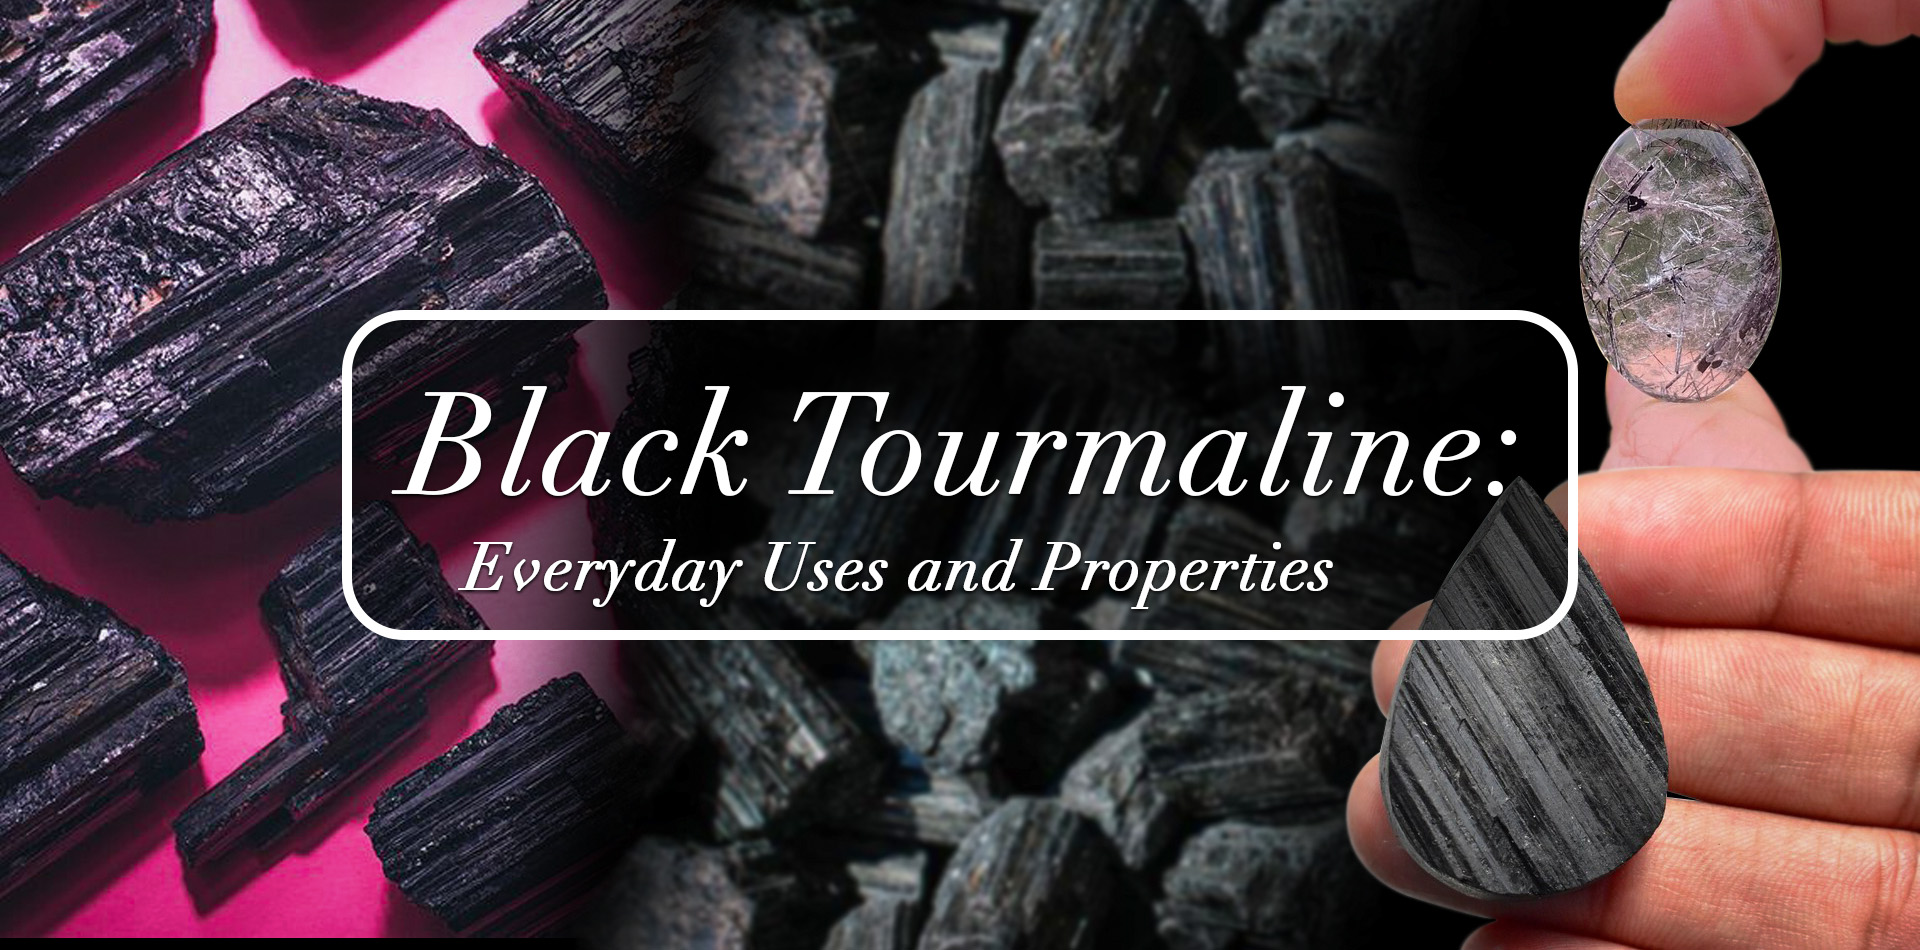 Black Tourmaline: Everyday Uses And Properties